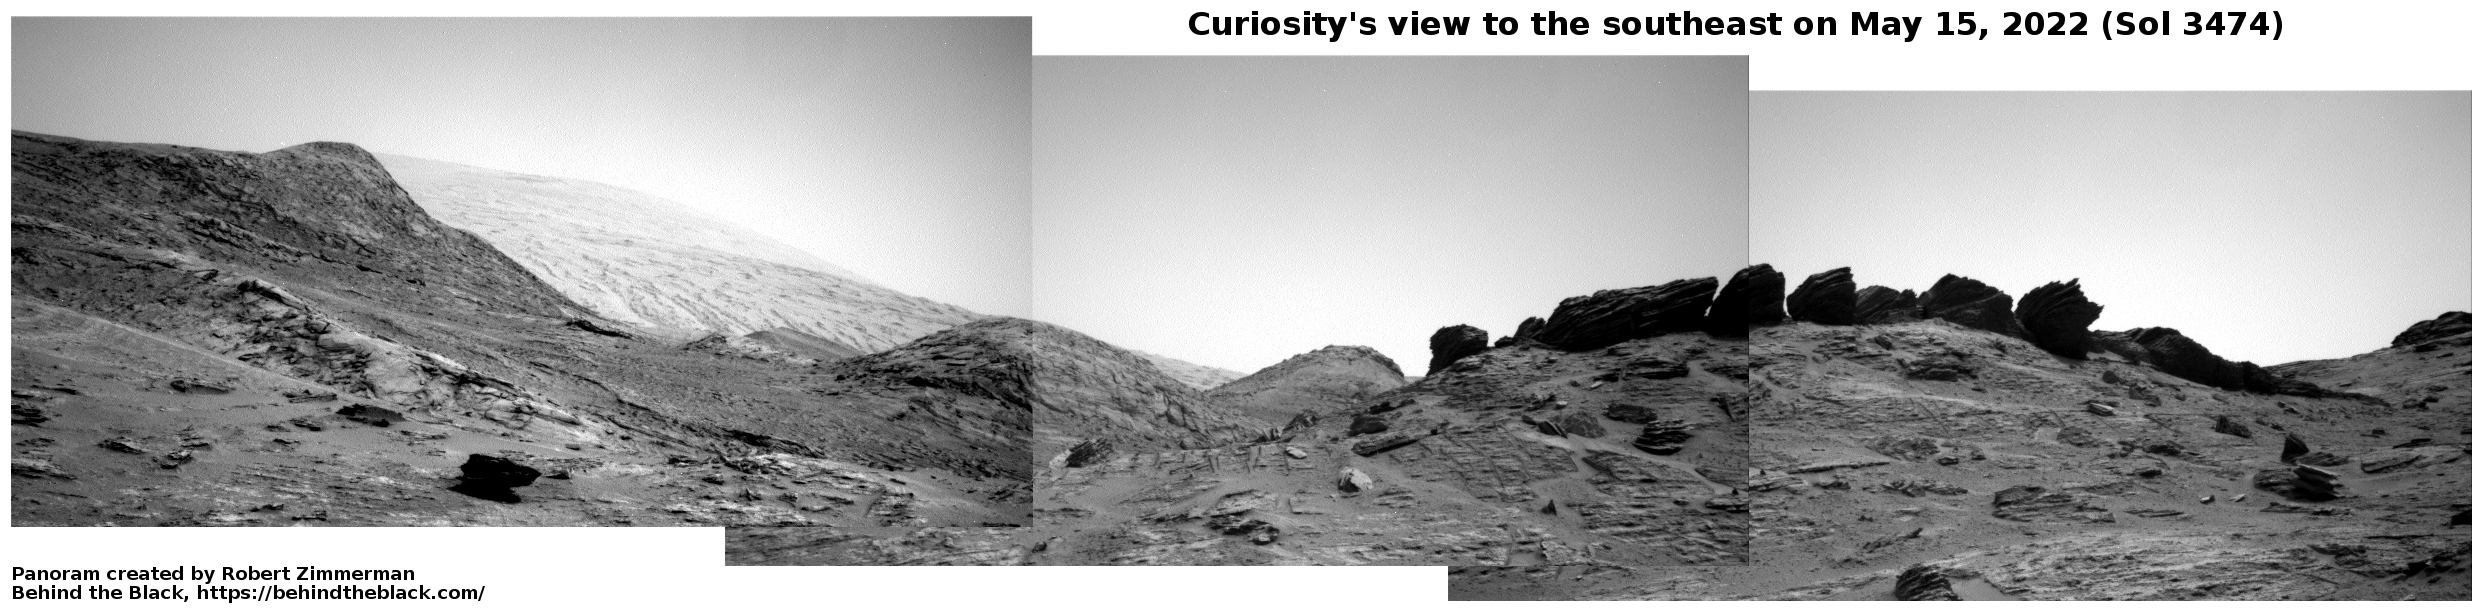 Curiosity's view to the southeast, May 15, 2022 (Sol 3474)